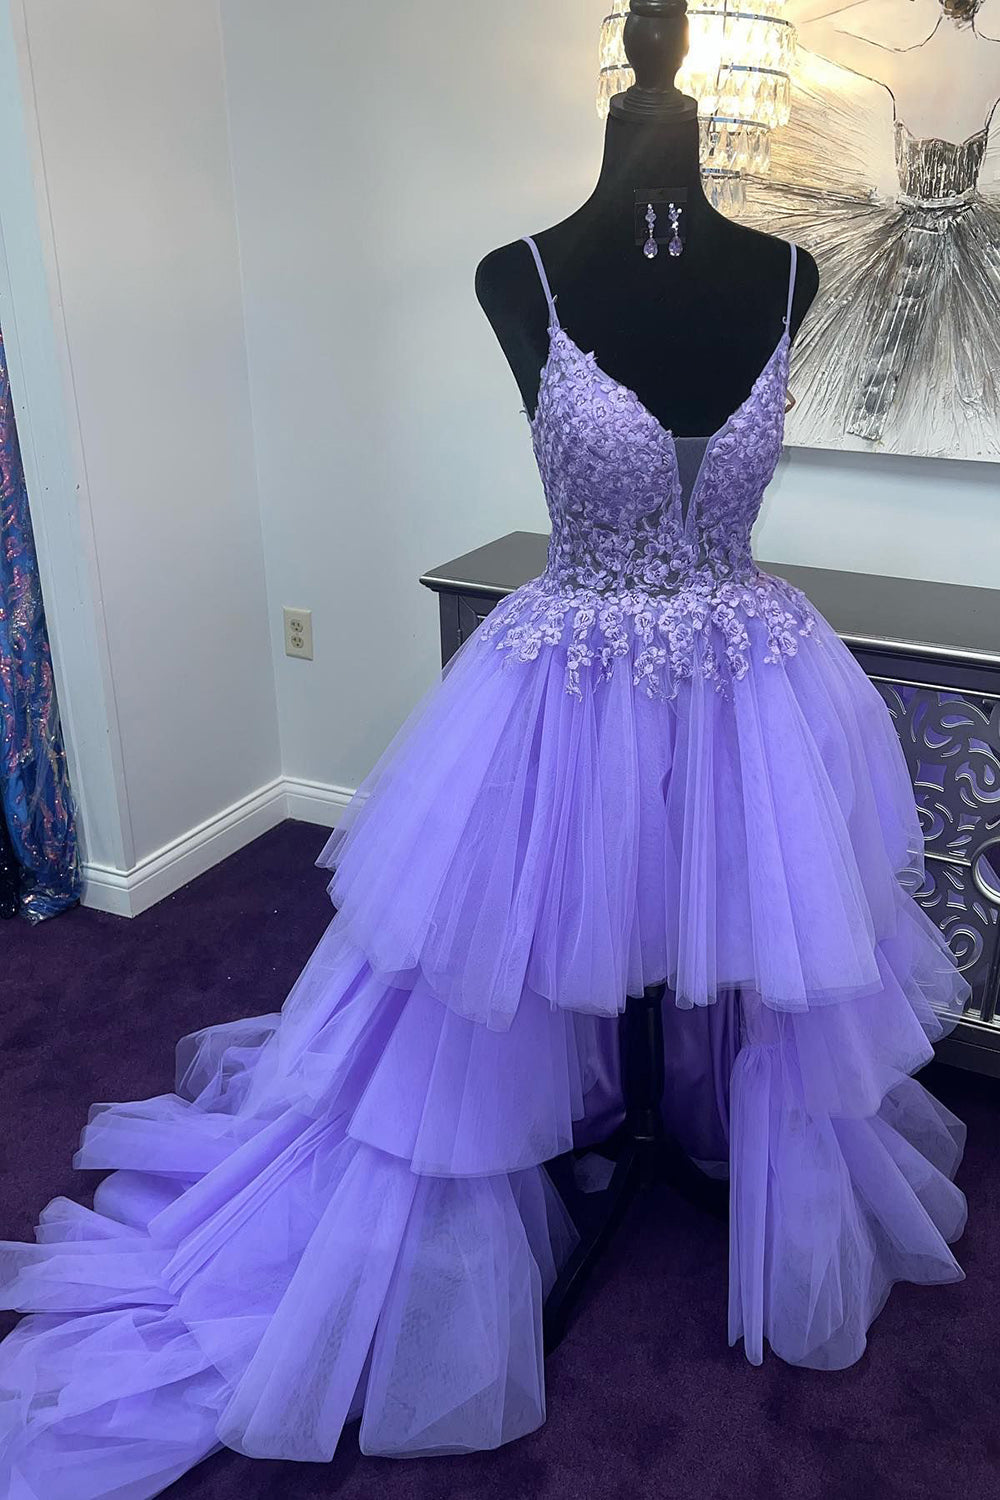 Purple High Low Tiered Homecoming Dress with Lace